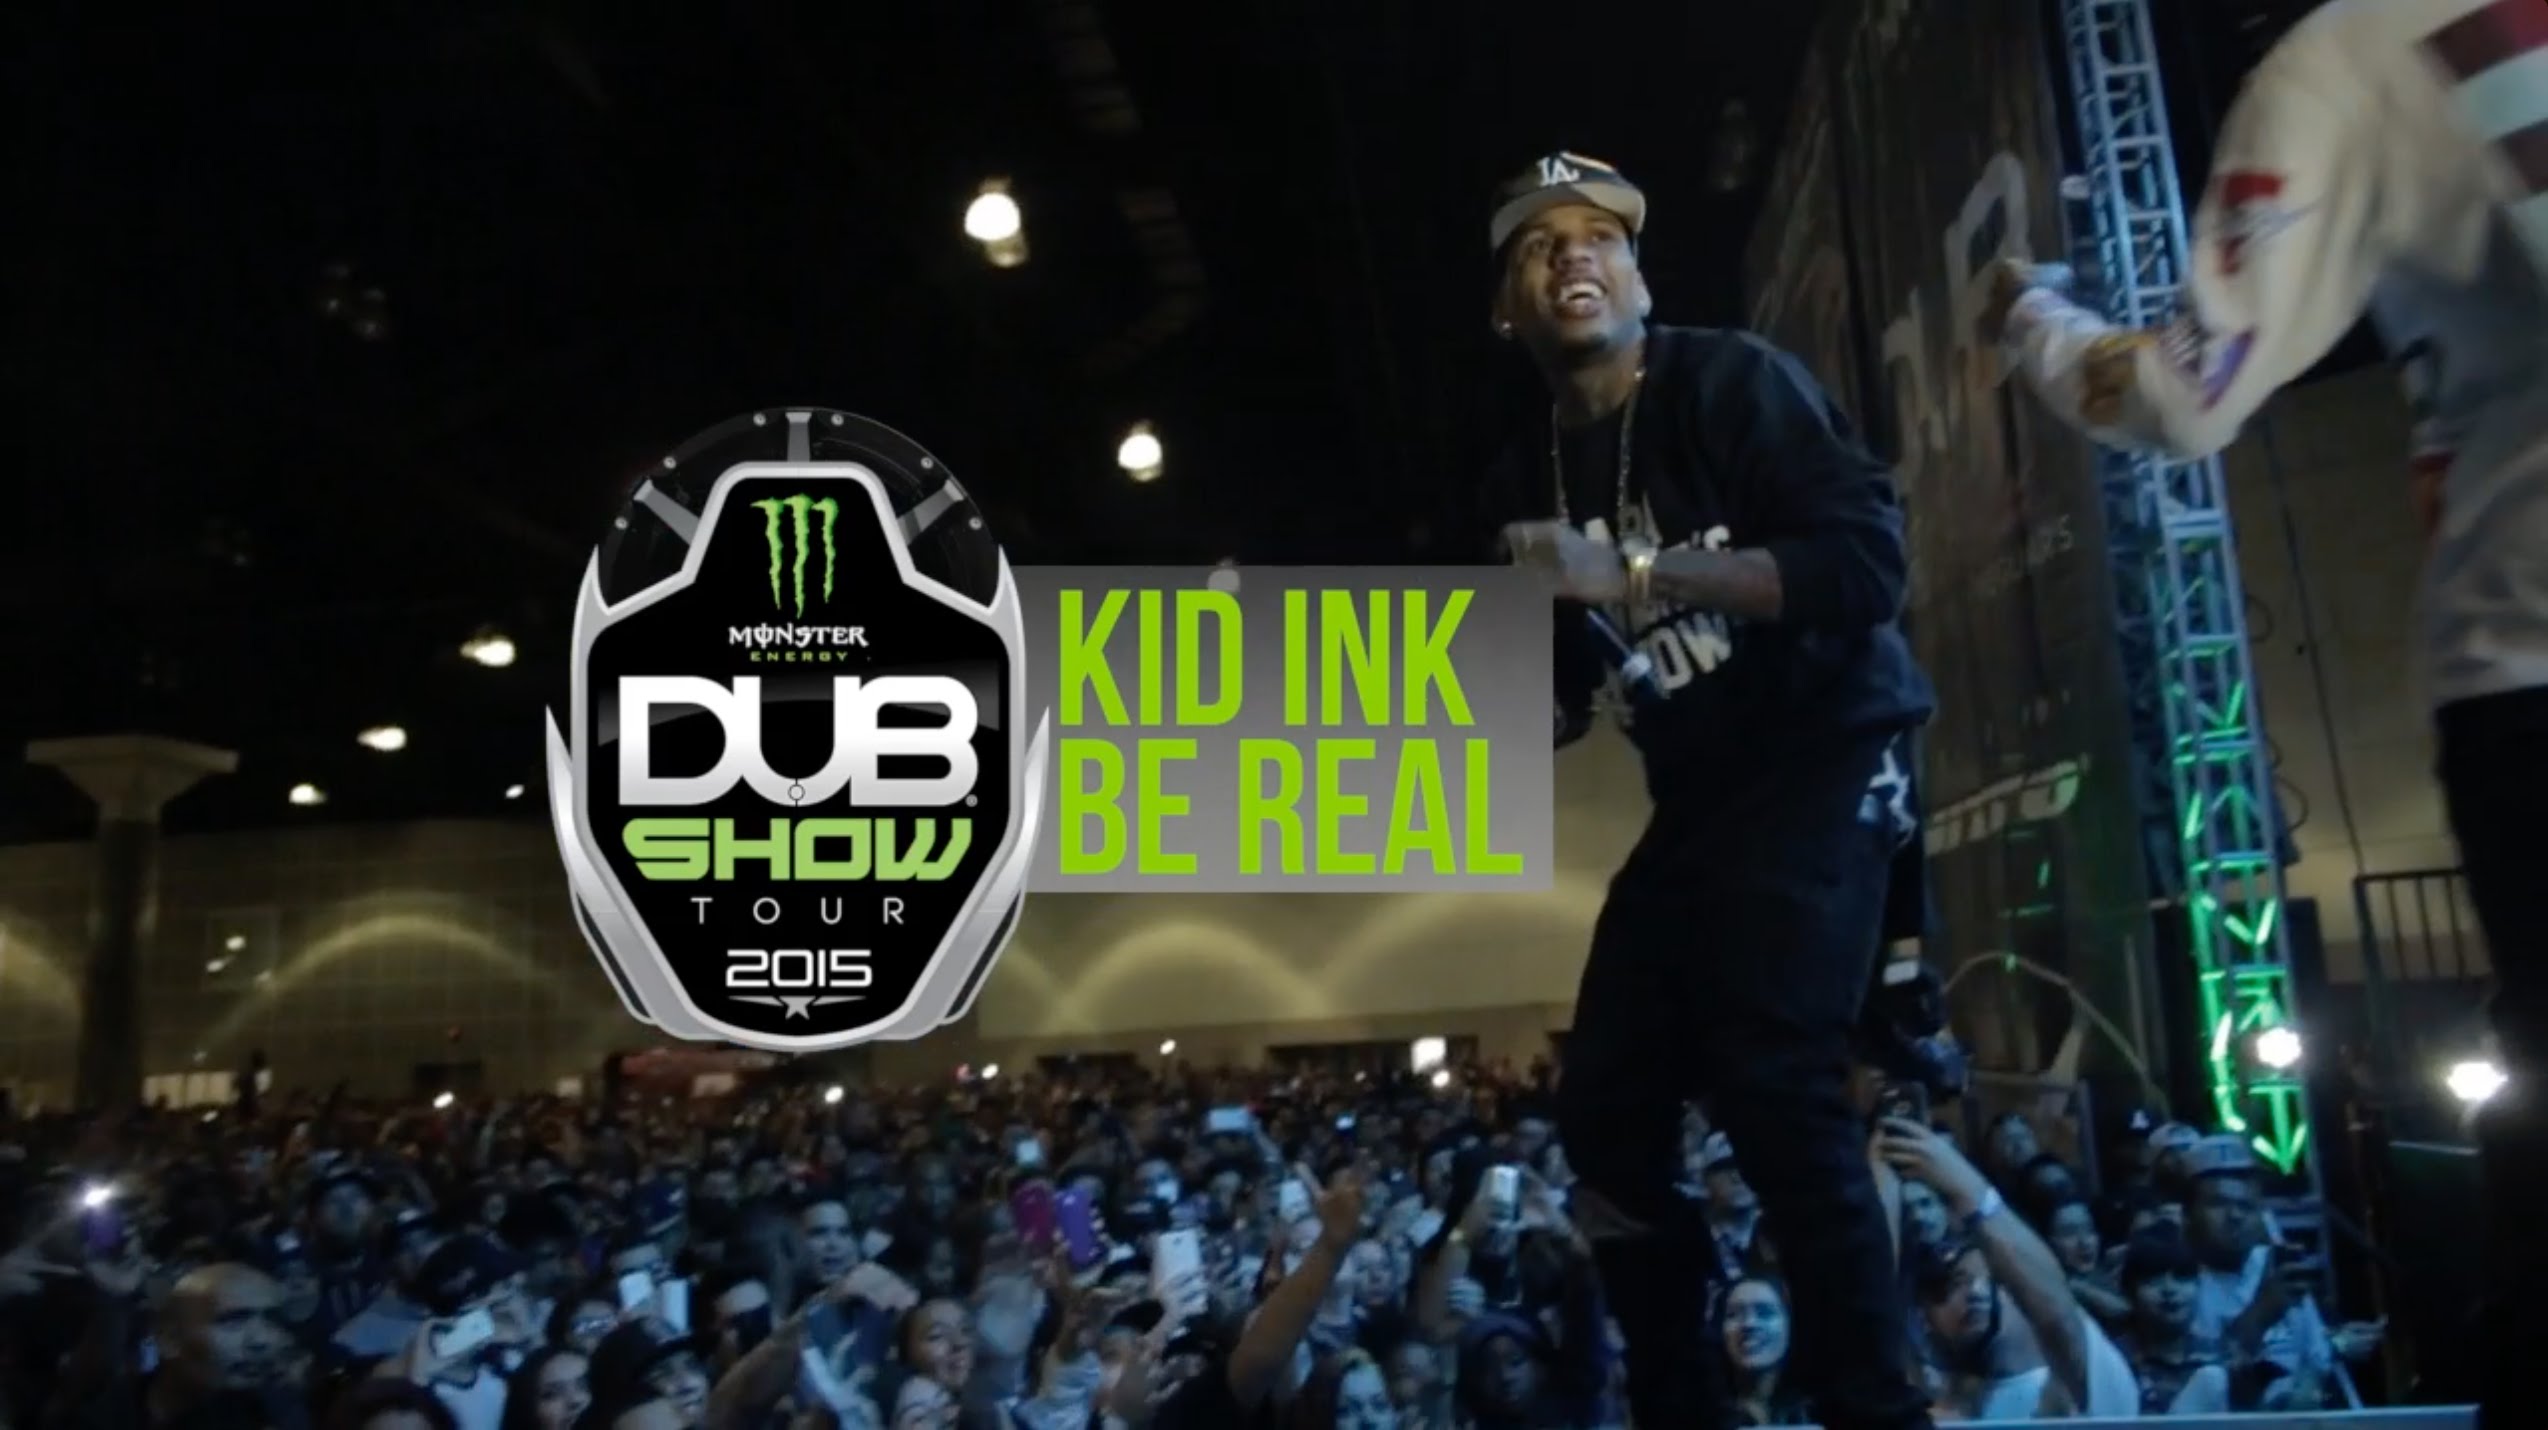 Kid Ink Performs “Be Real” At The Dub Show (Video)